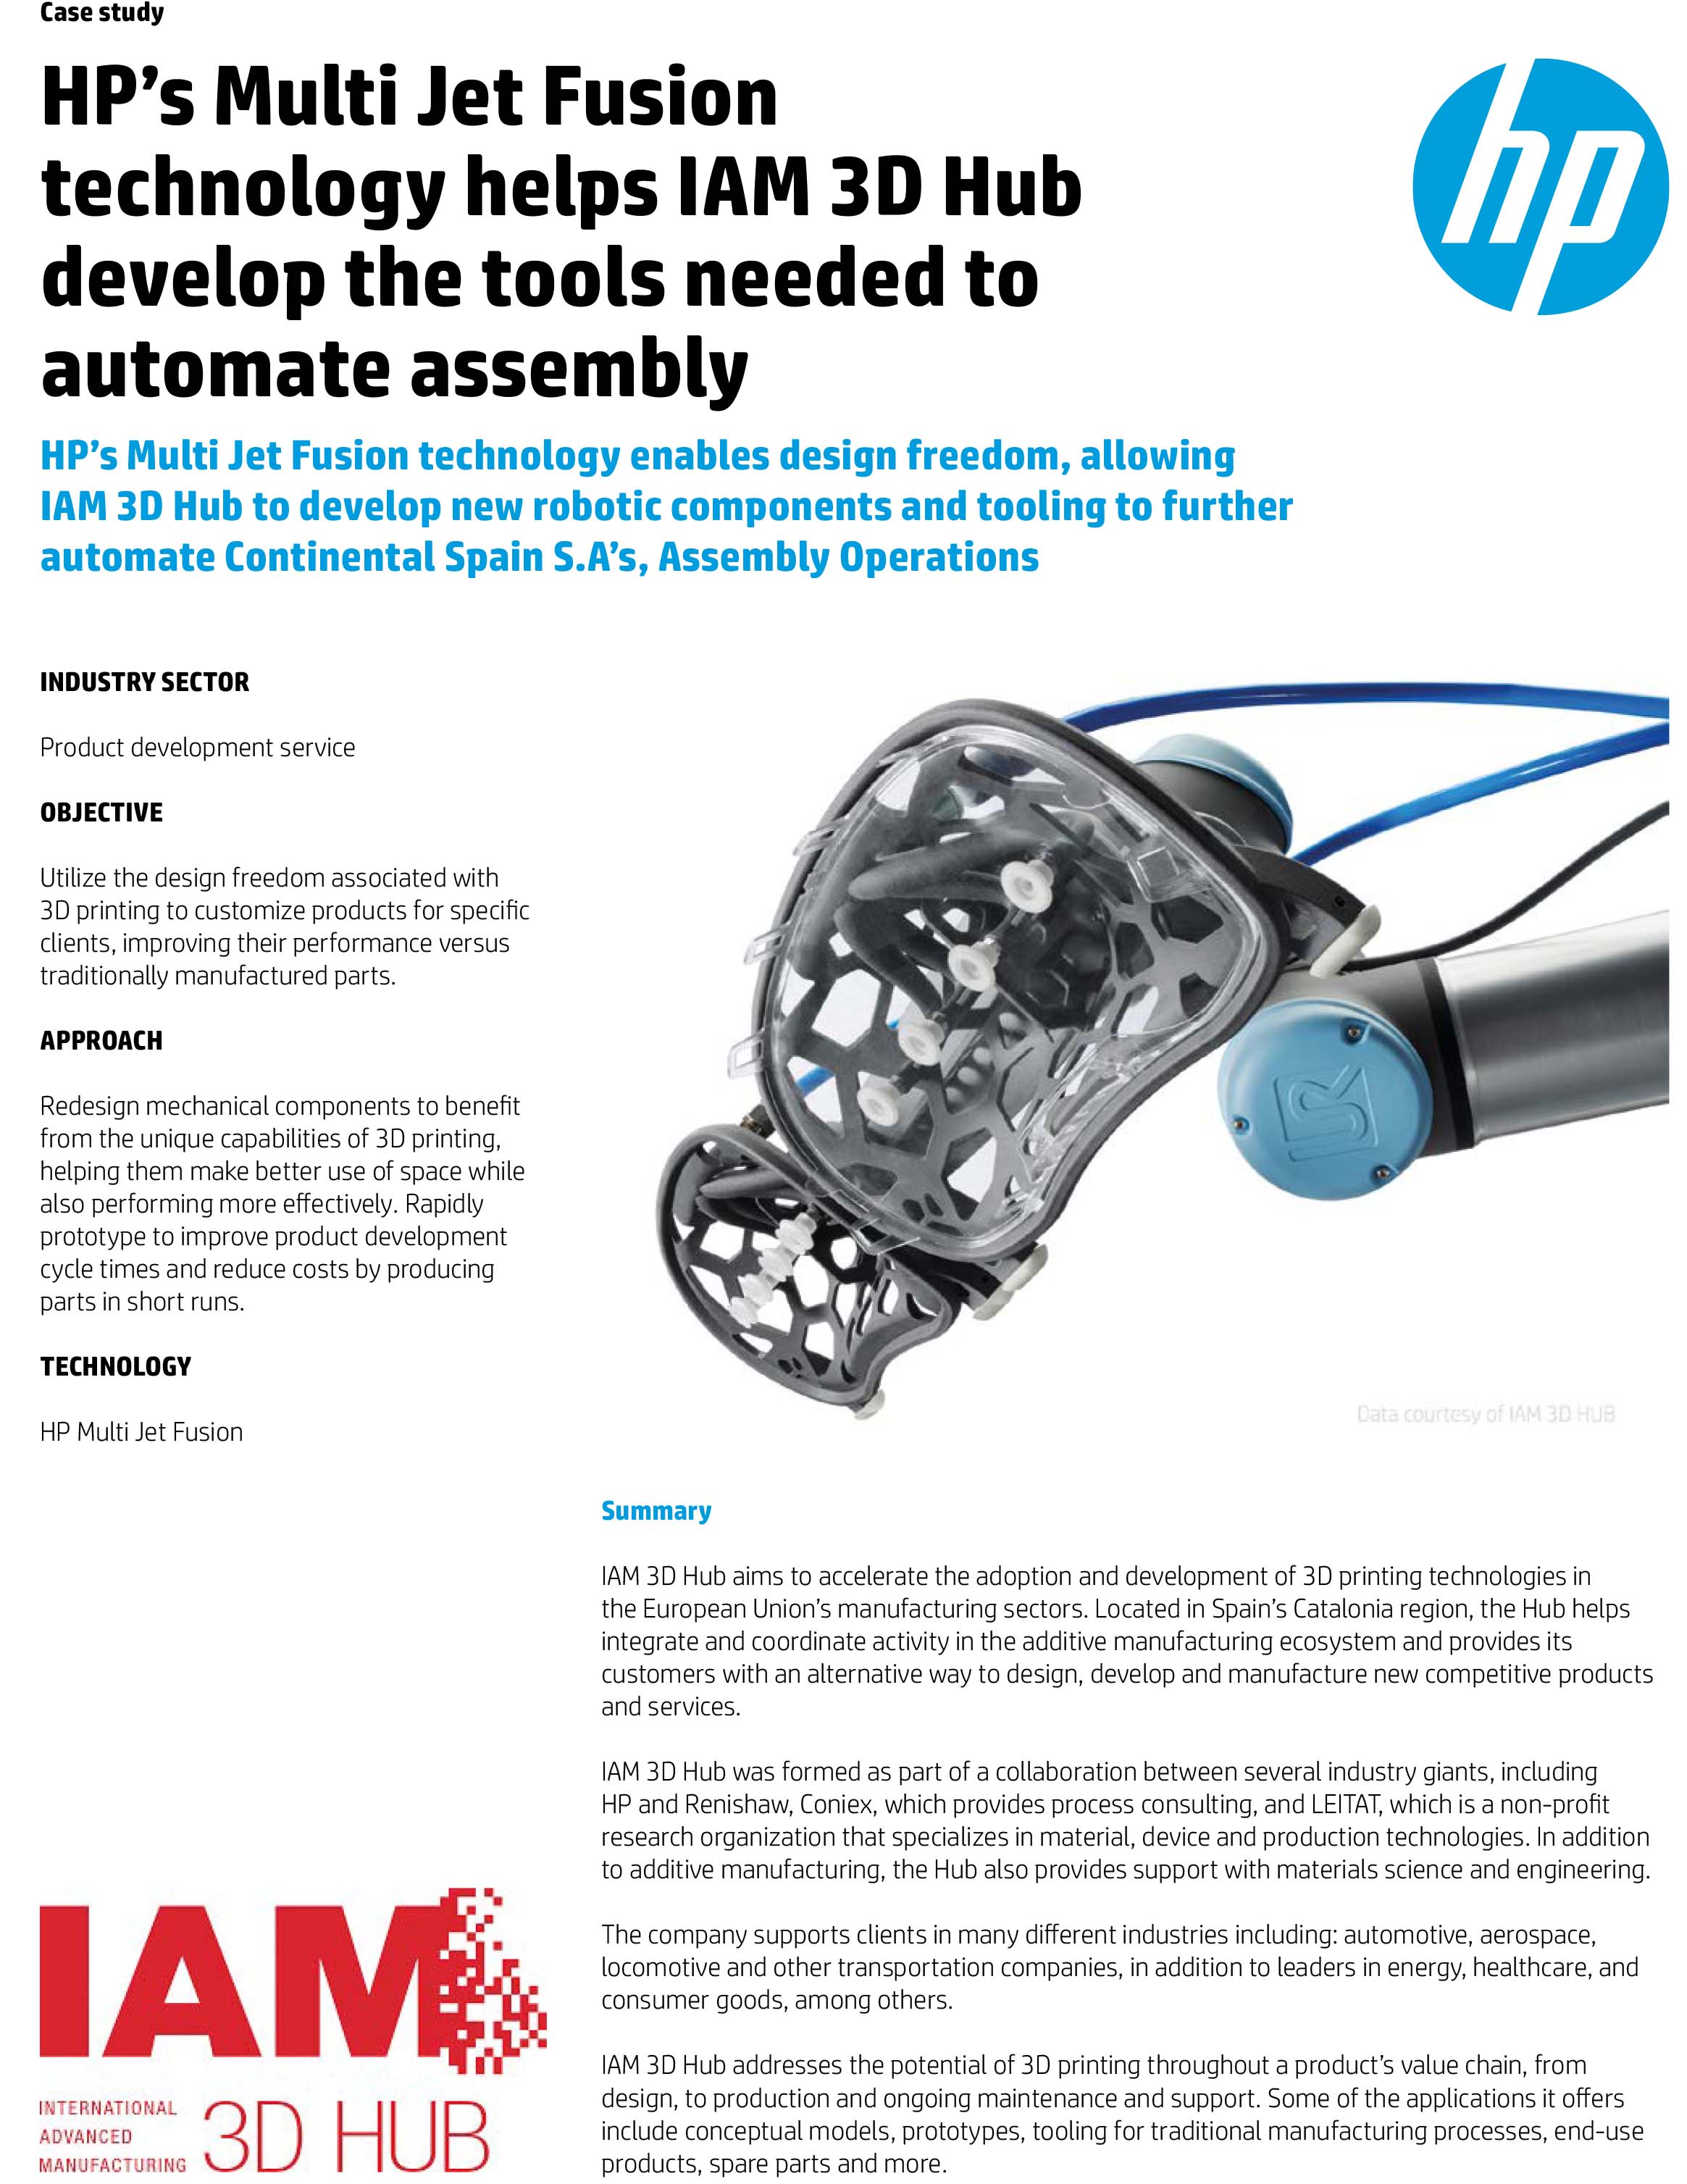 HP’s Multi Jet Fusion technology helps IAM 3D Hub develop the tools needed to automate assembly